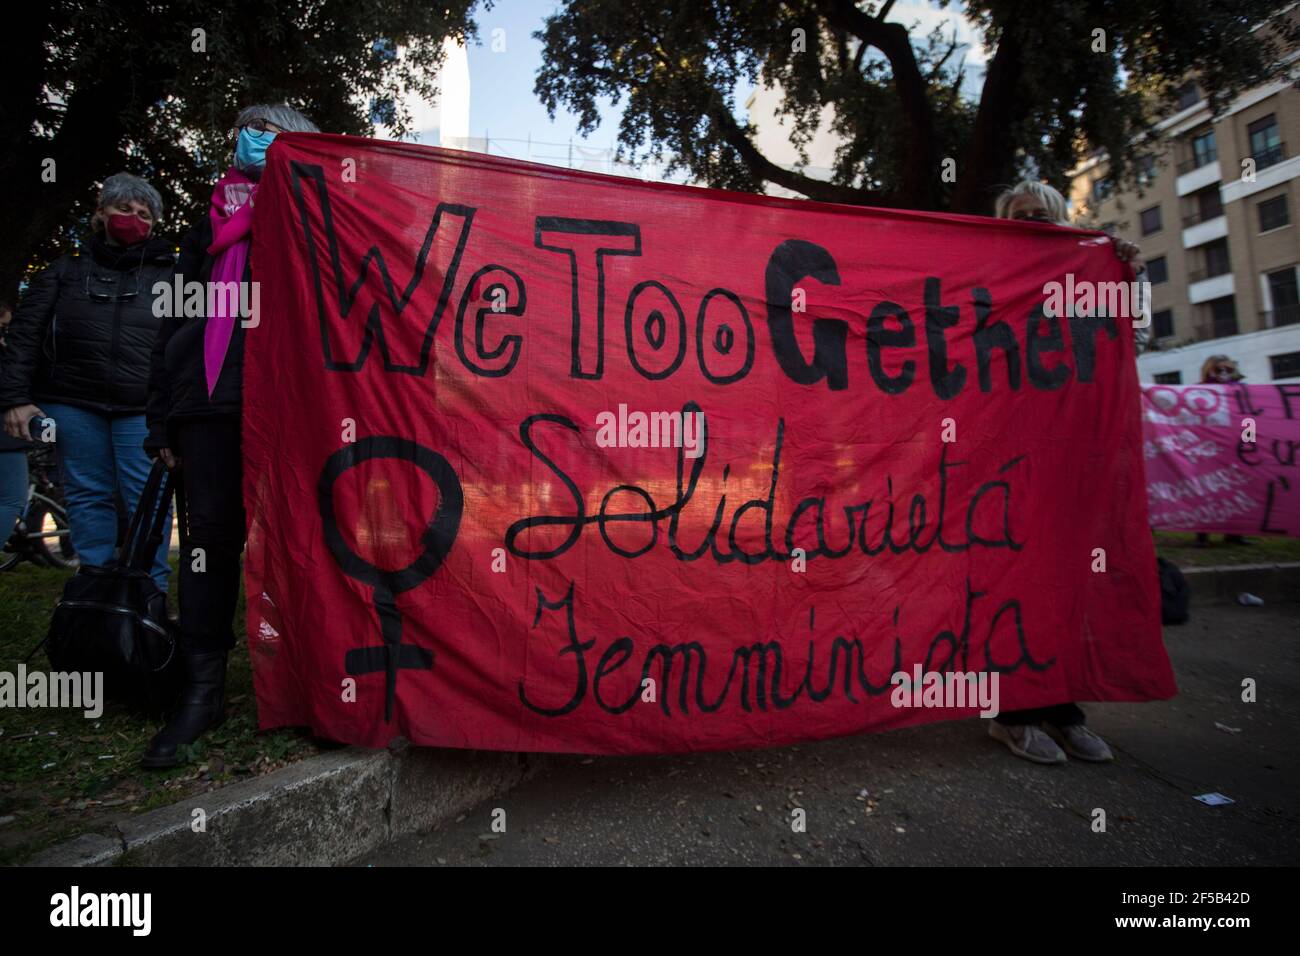 Rome, Italy. 25th Mar, 2021. The feminist and transfeminist Italian organization Non Una Di Meno held a Demonstration in Rome in support and solidarity with women in Turkey and against the decision of Turkish President, Recep Tayyip Erdogan, to pull his Country out of the Council of Europe Convention on Preventing and Combating Violence Against Women and Domestic Violence, also known as the Istanbul Convention. Stock Photo